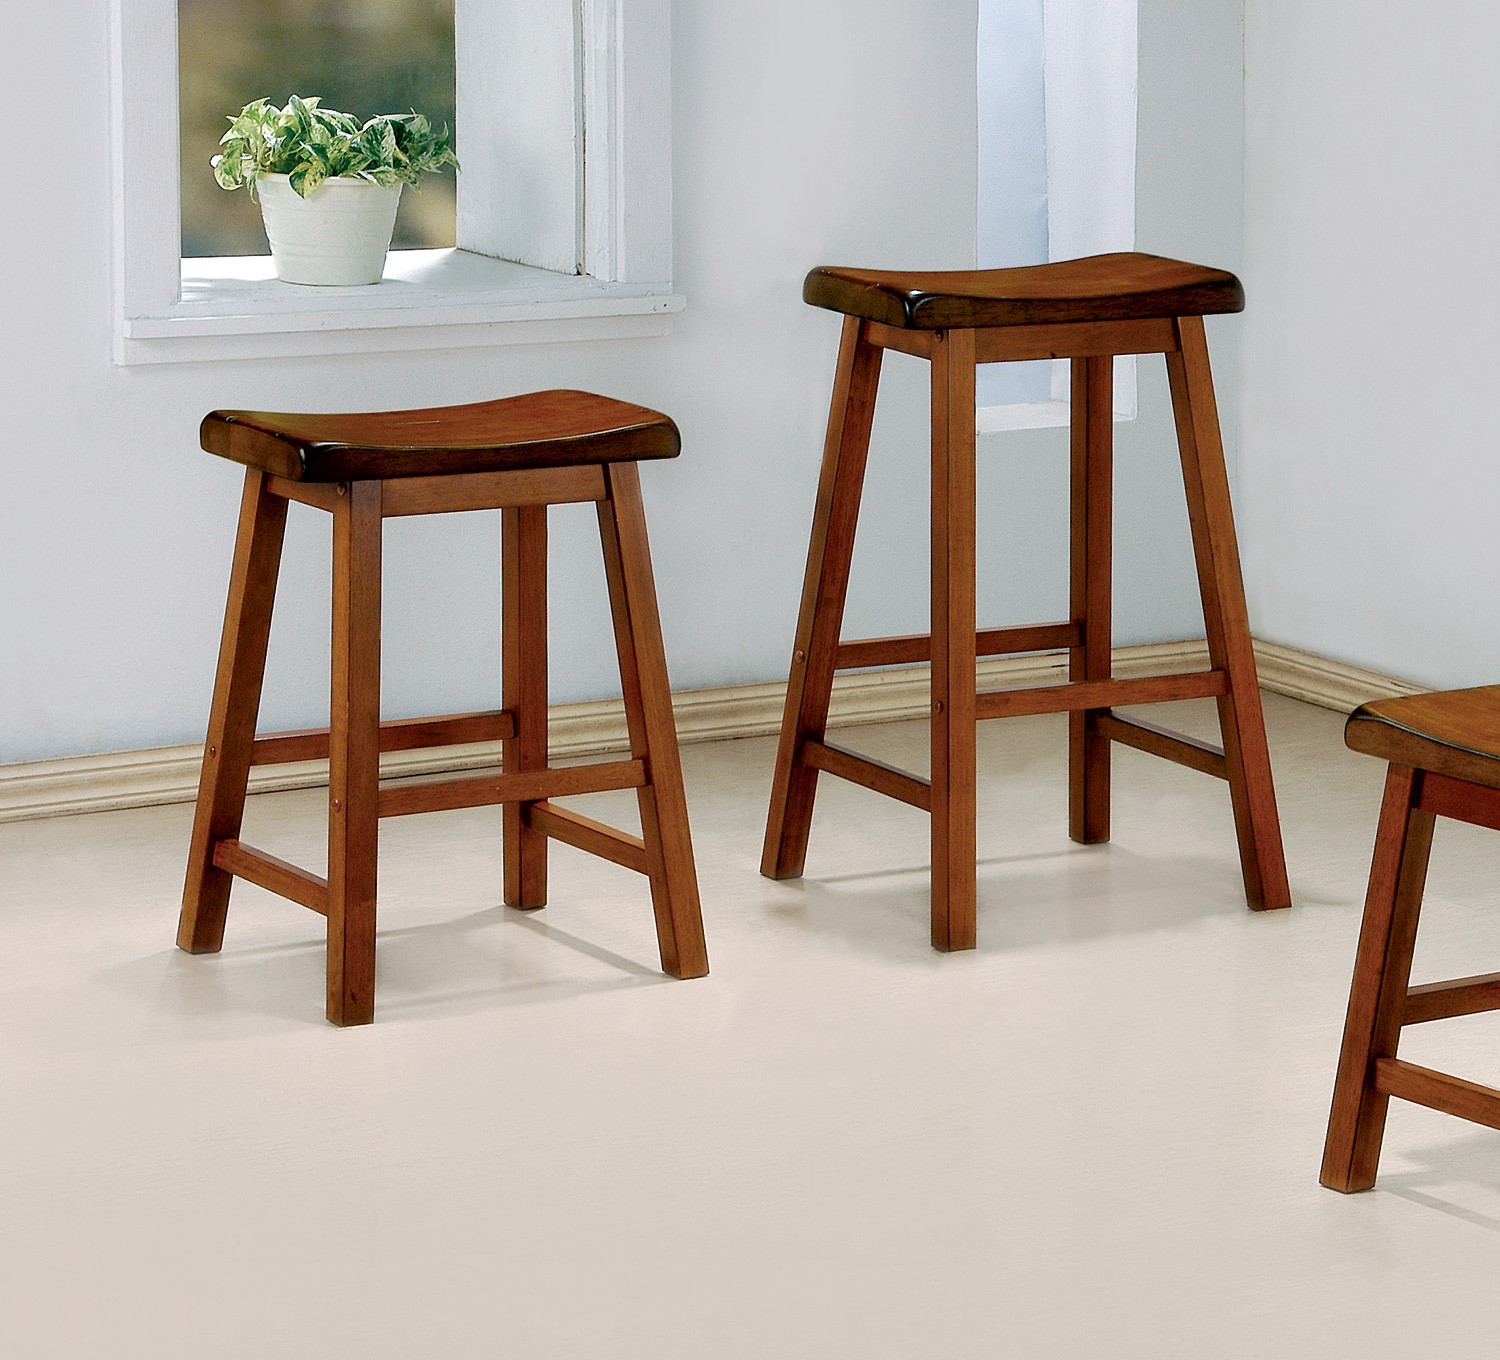 Cozy All Images wooden bar stool chairs